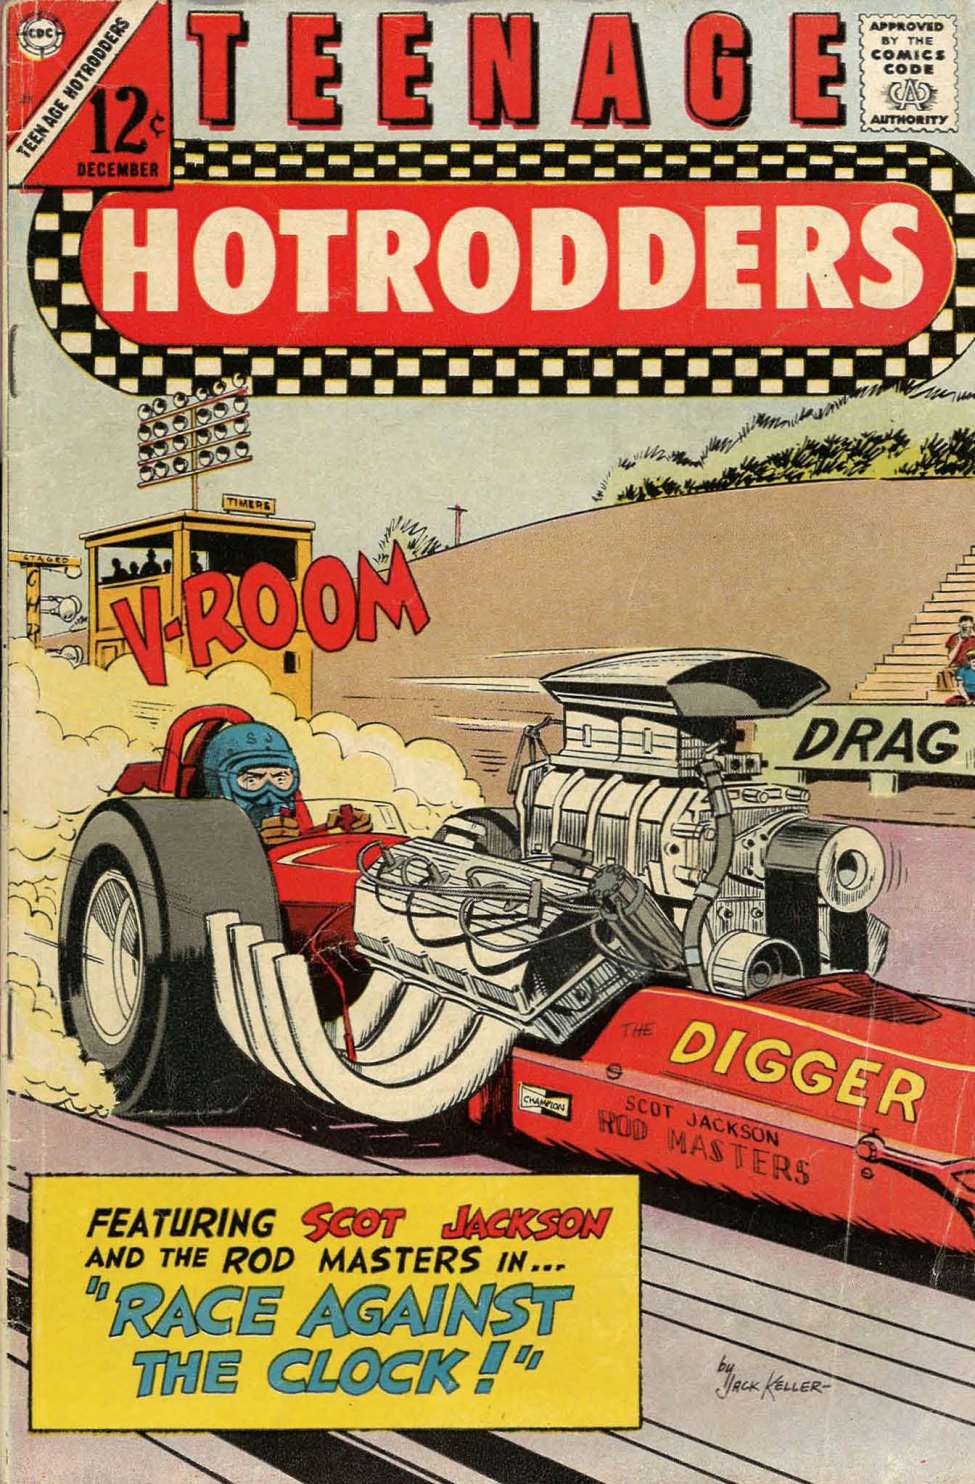 Book Cover For Teenage Hotrodders 21